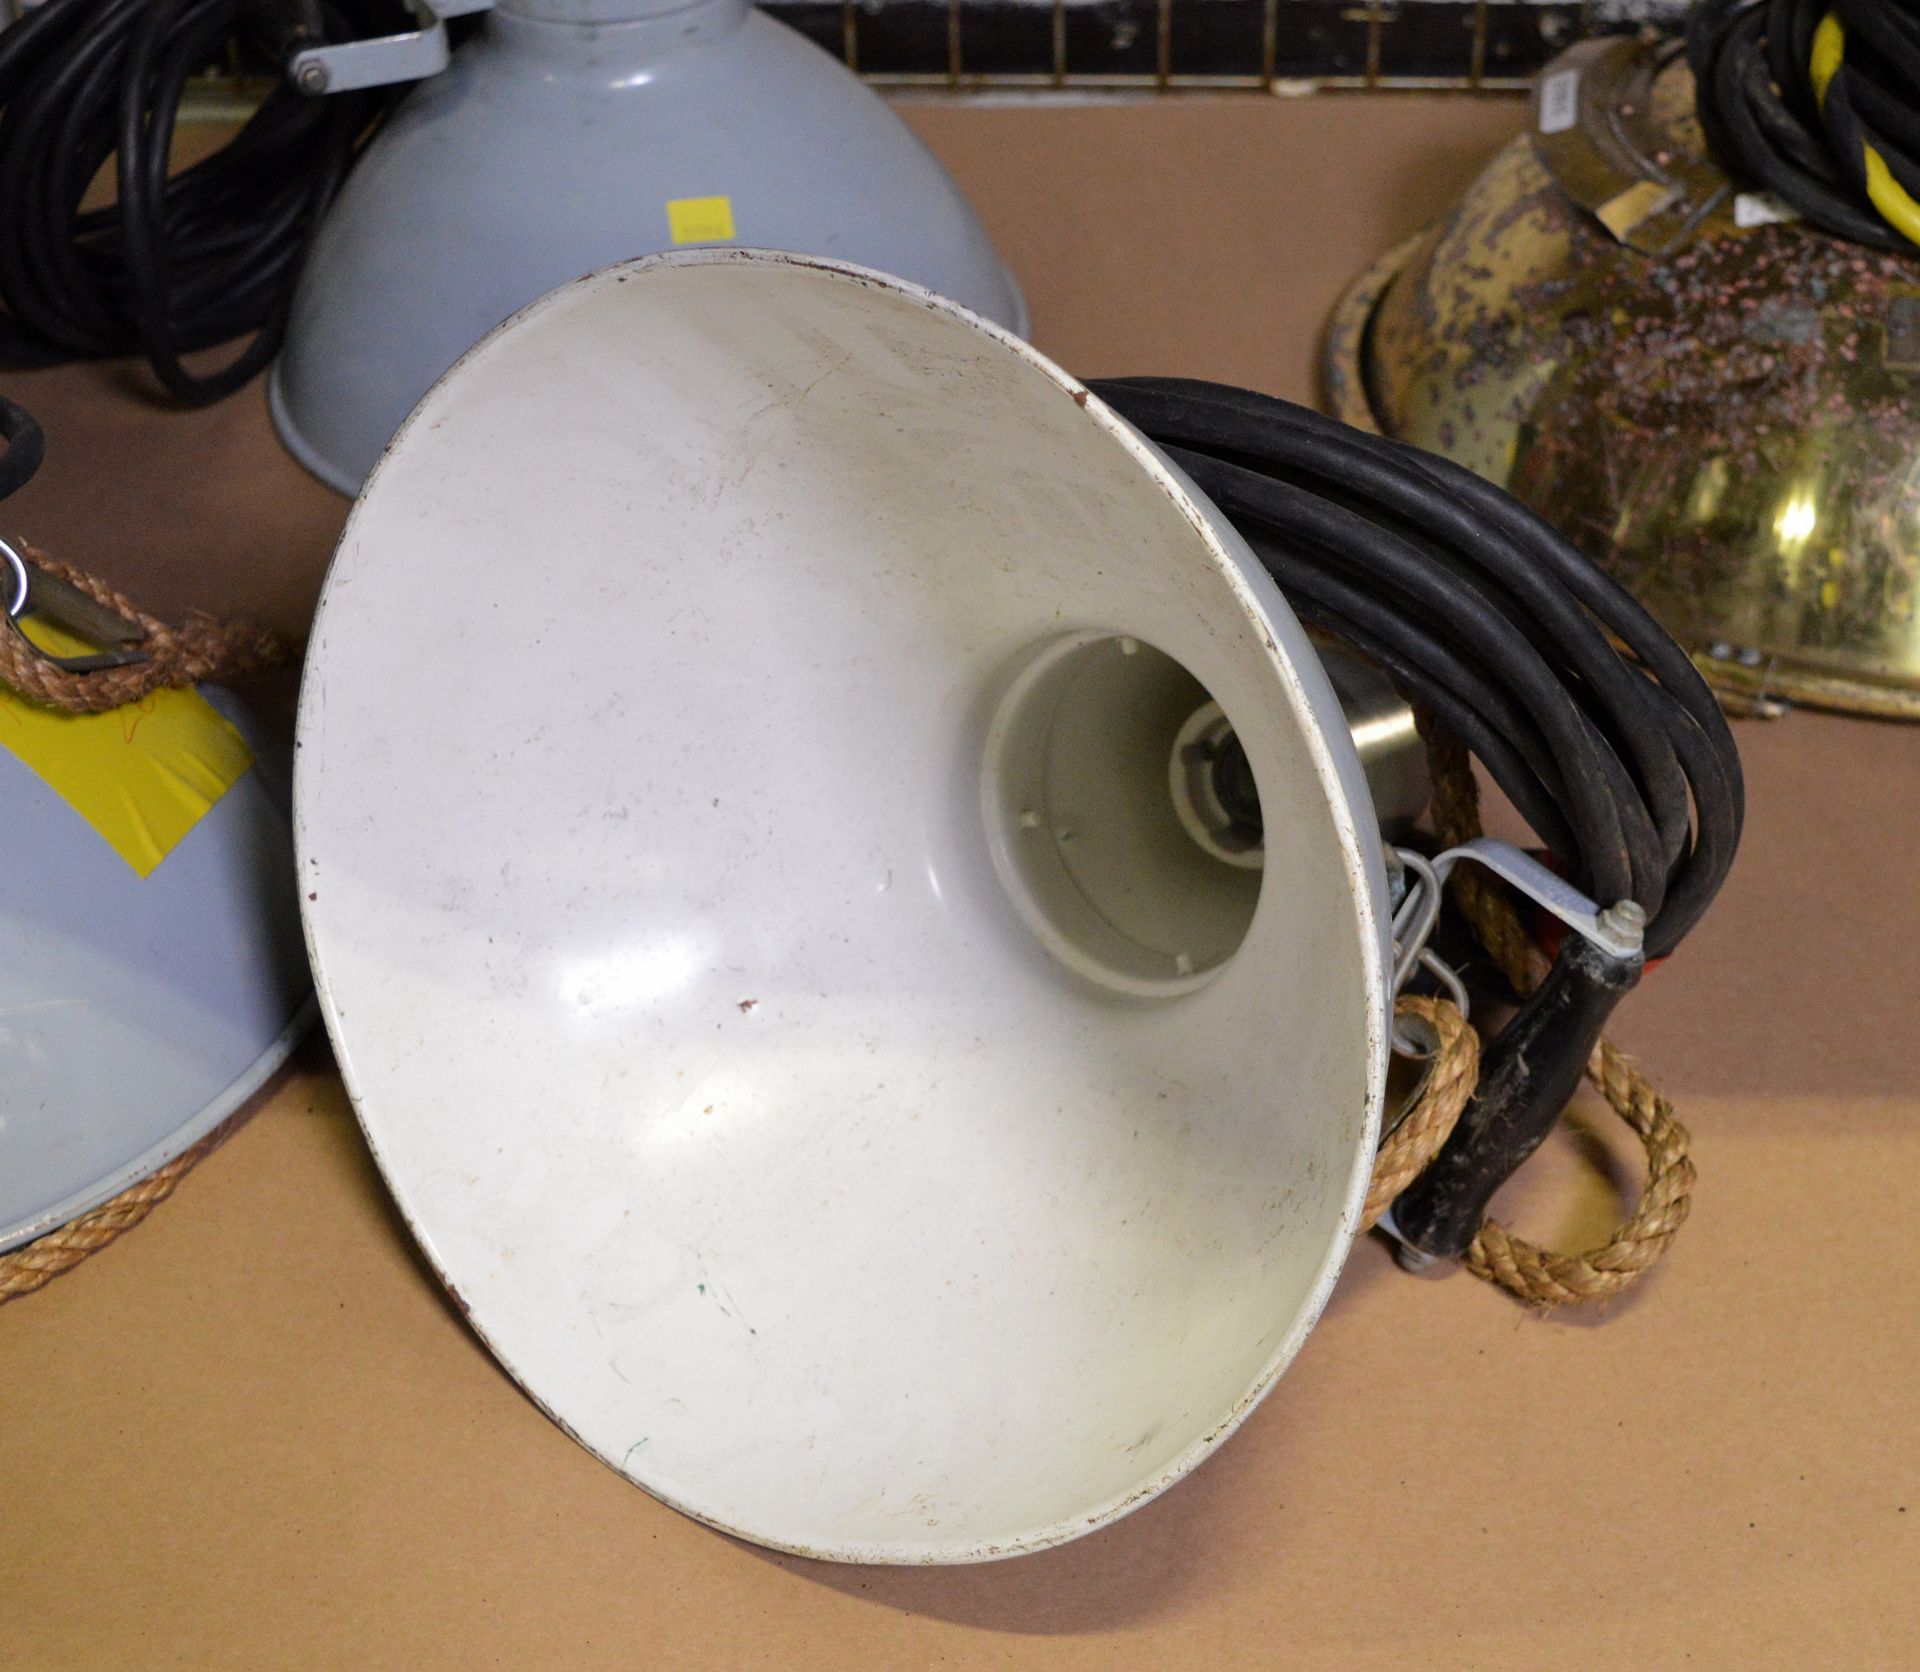 1x Brass Dome Suspended 4-way Light Unit, 3x Portable Painted Brass Floodlights - Image 3 of 5